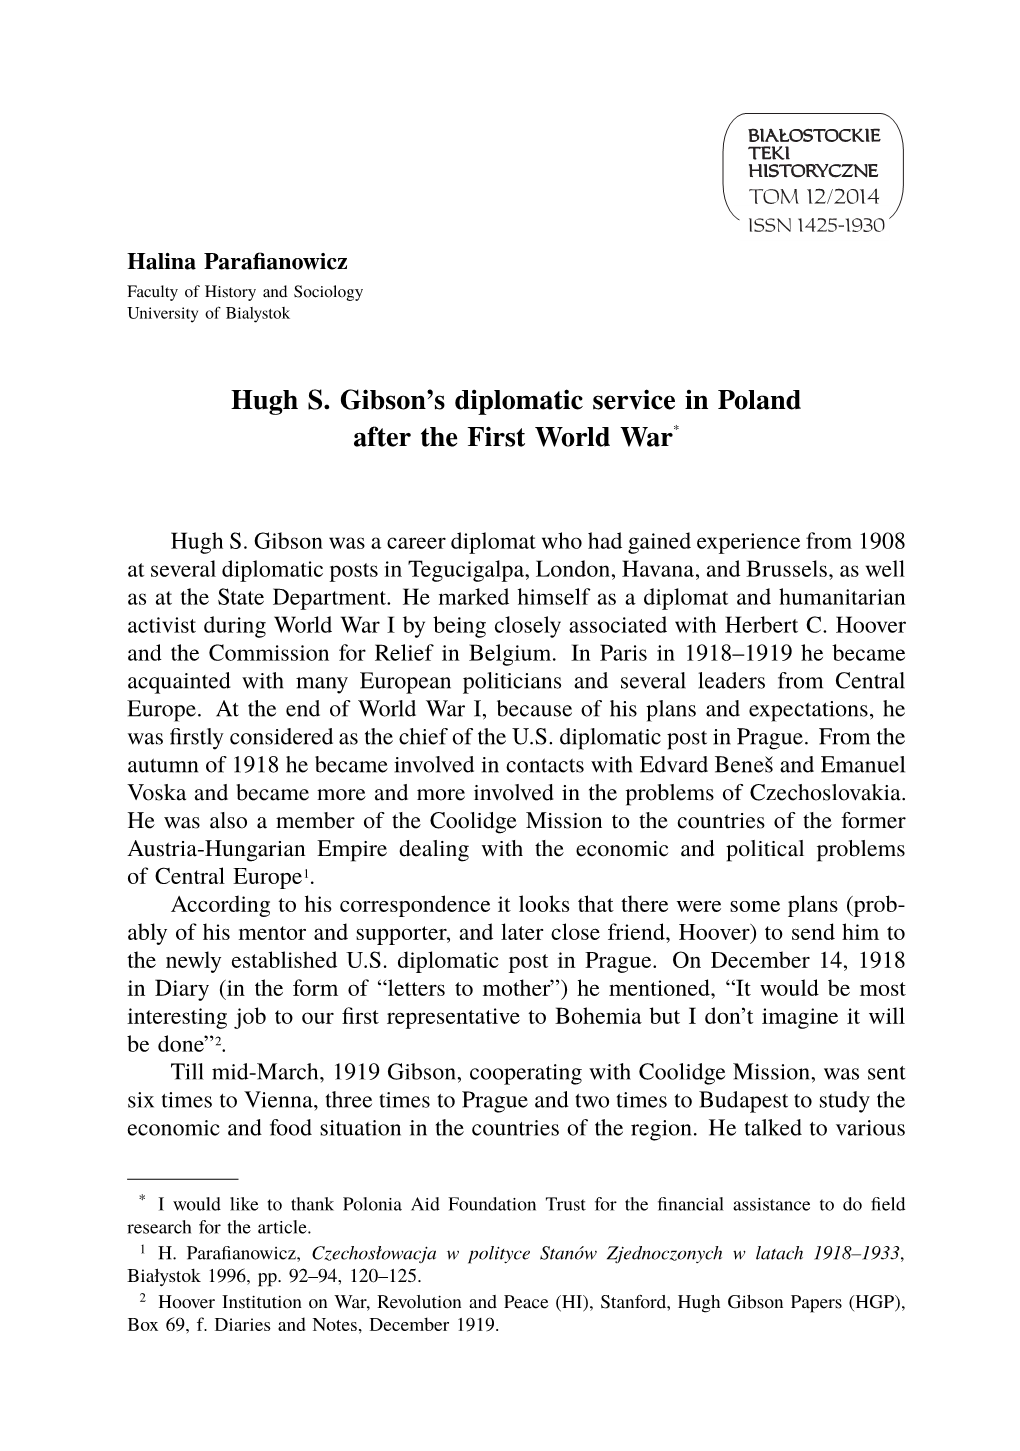 Hugh S. Gibson's Diplomatic Service in Poland After the First World War*